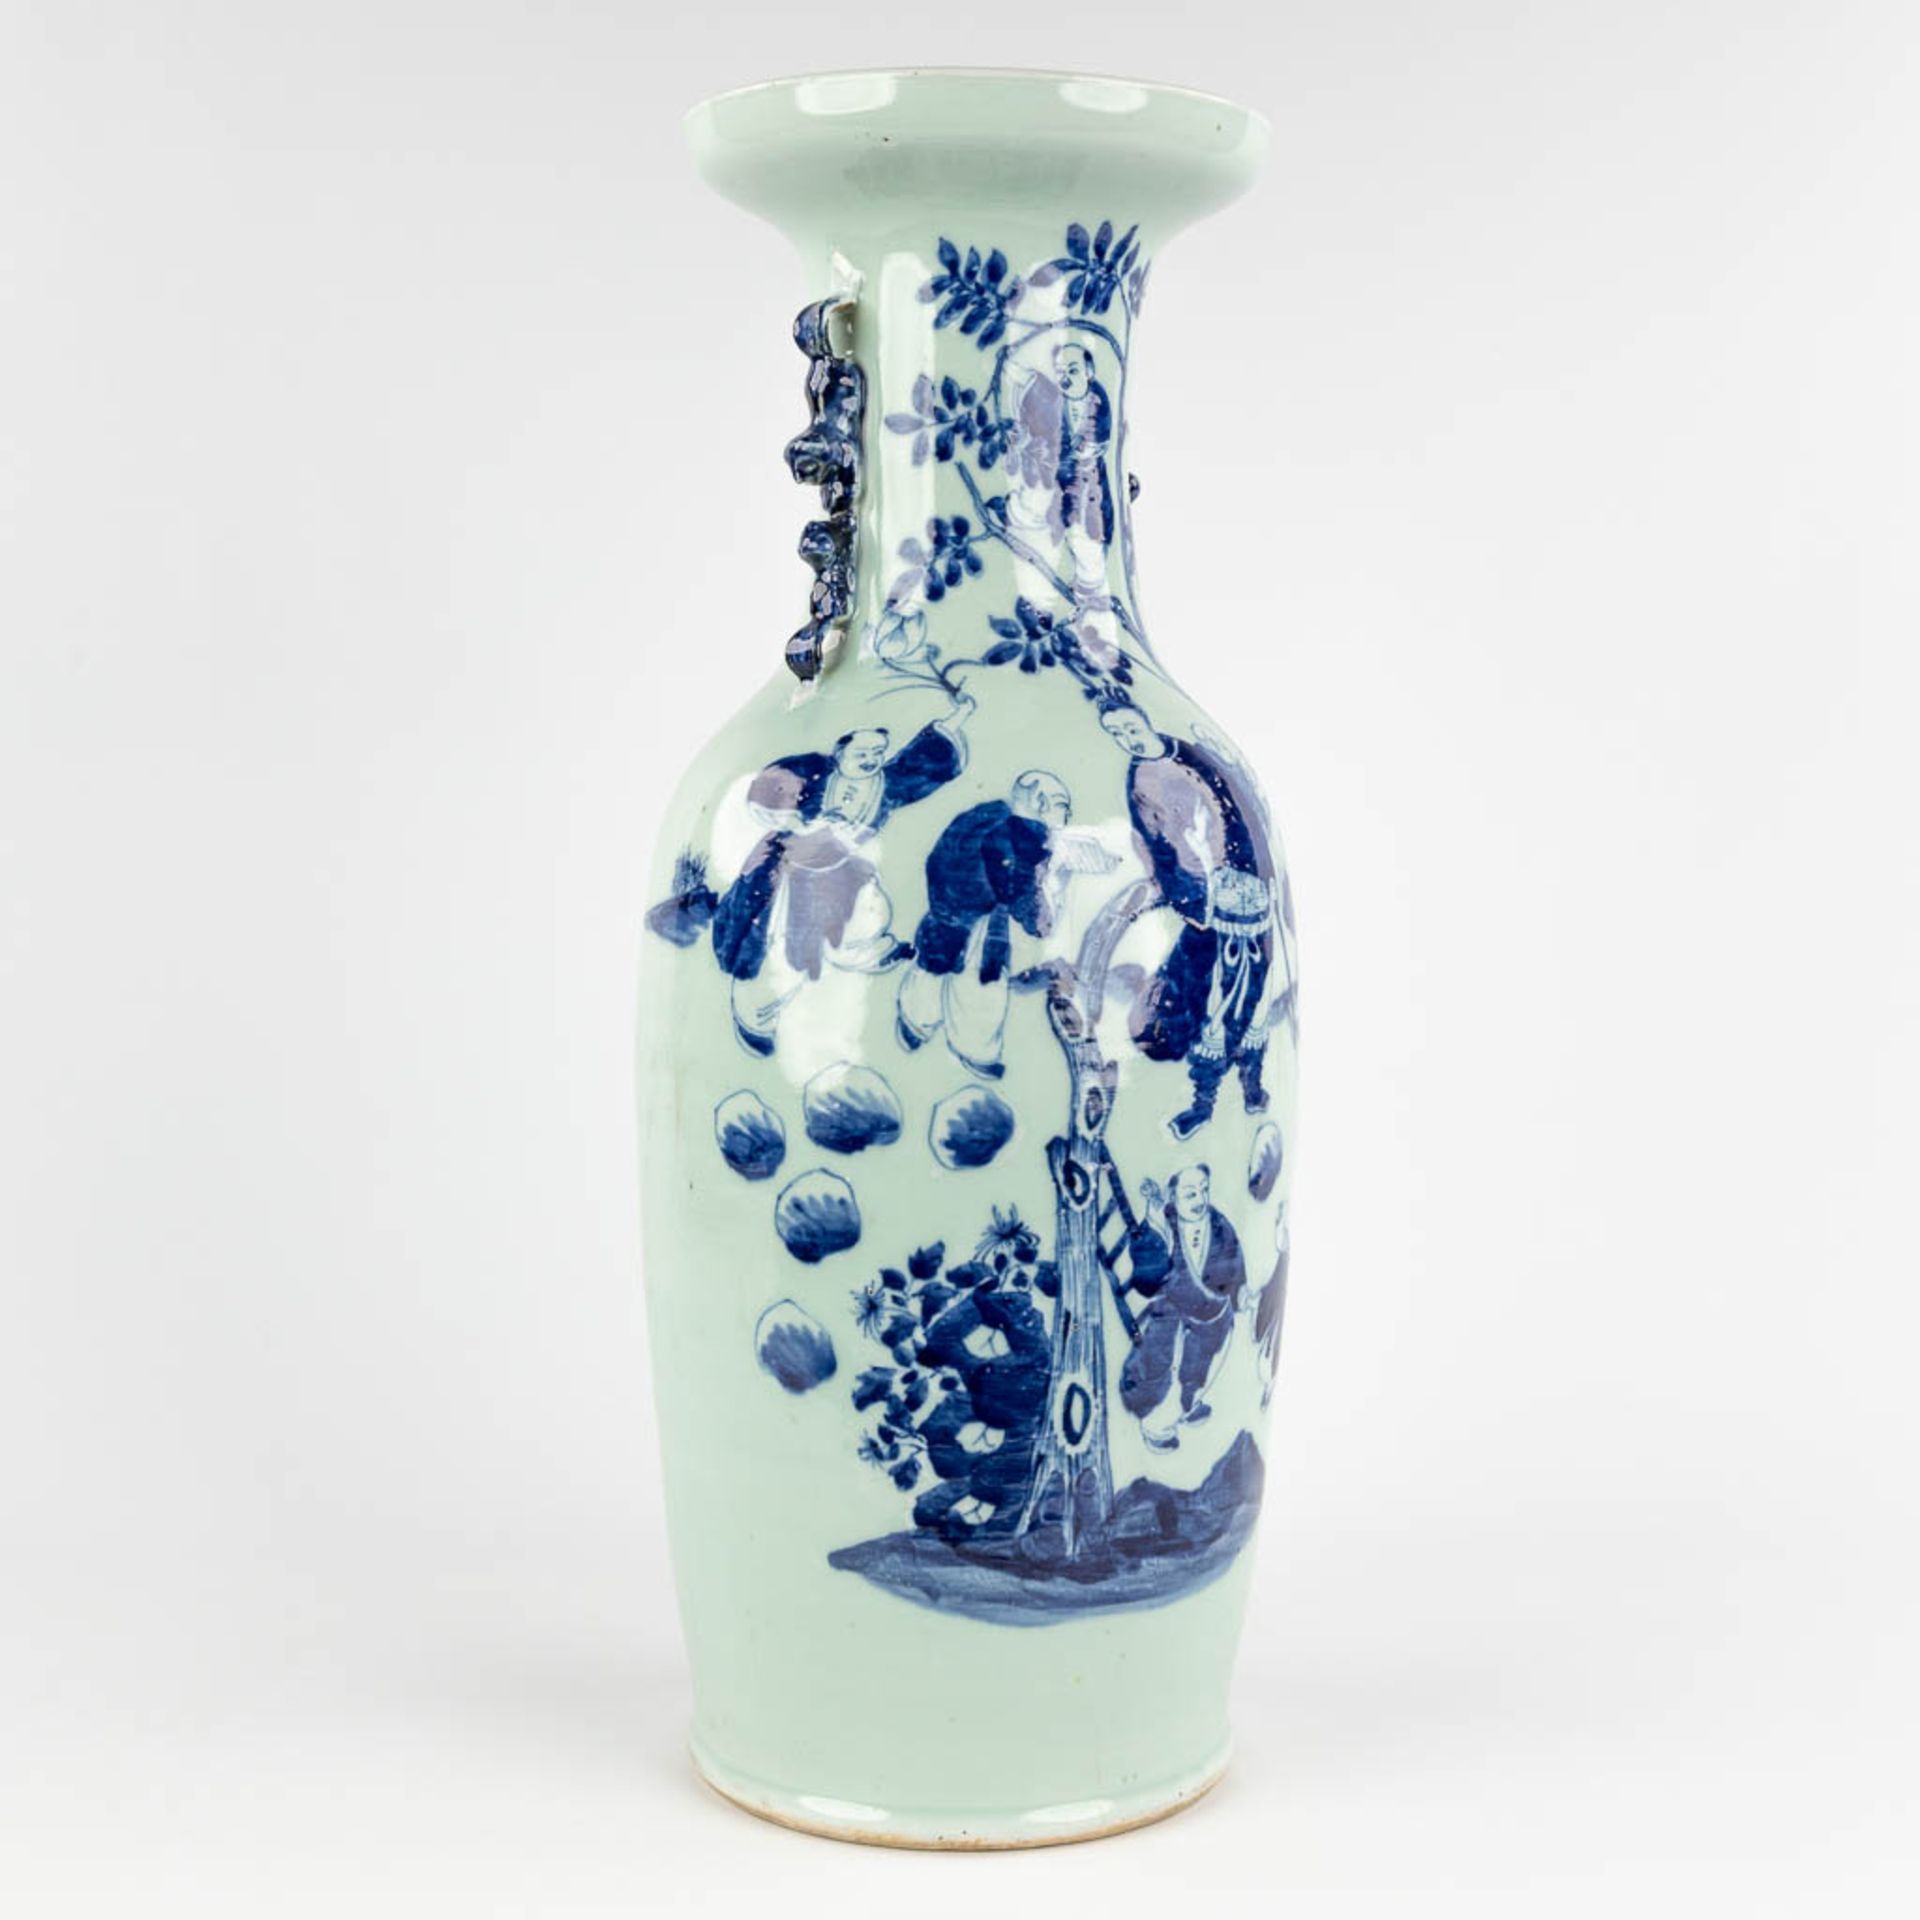 A Chinese celadon vase, blue-white, decorated with wise men. 19th/20th C. (H:59 x D:23 cm) - Image 3 of 16